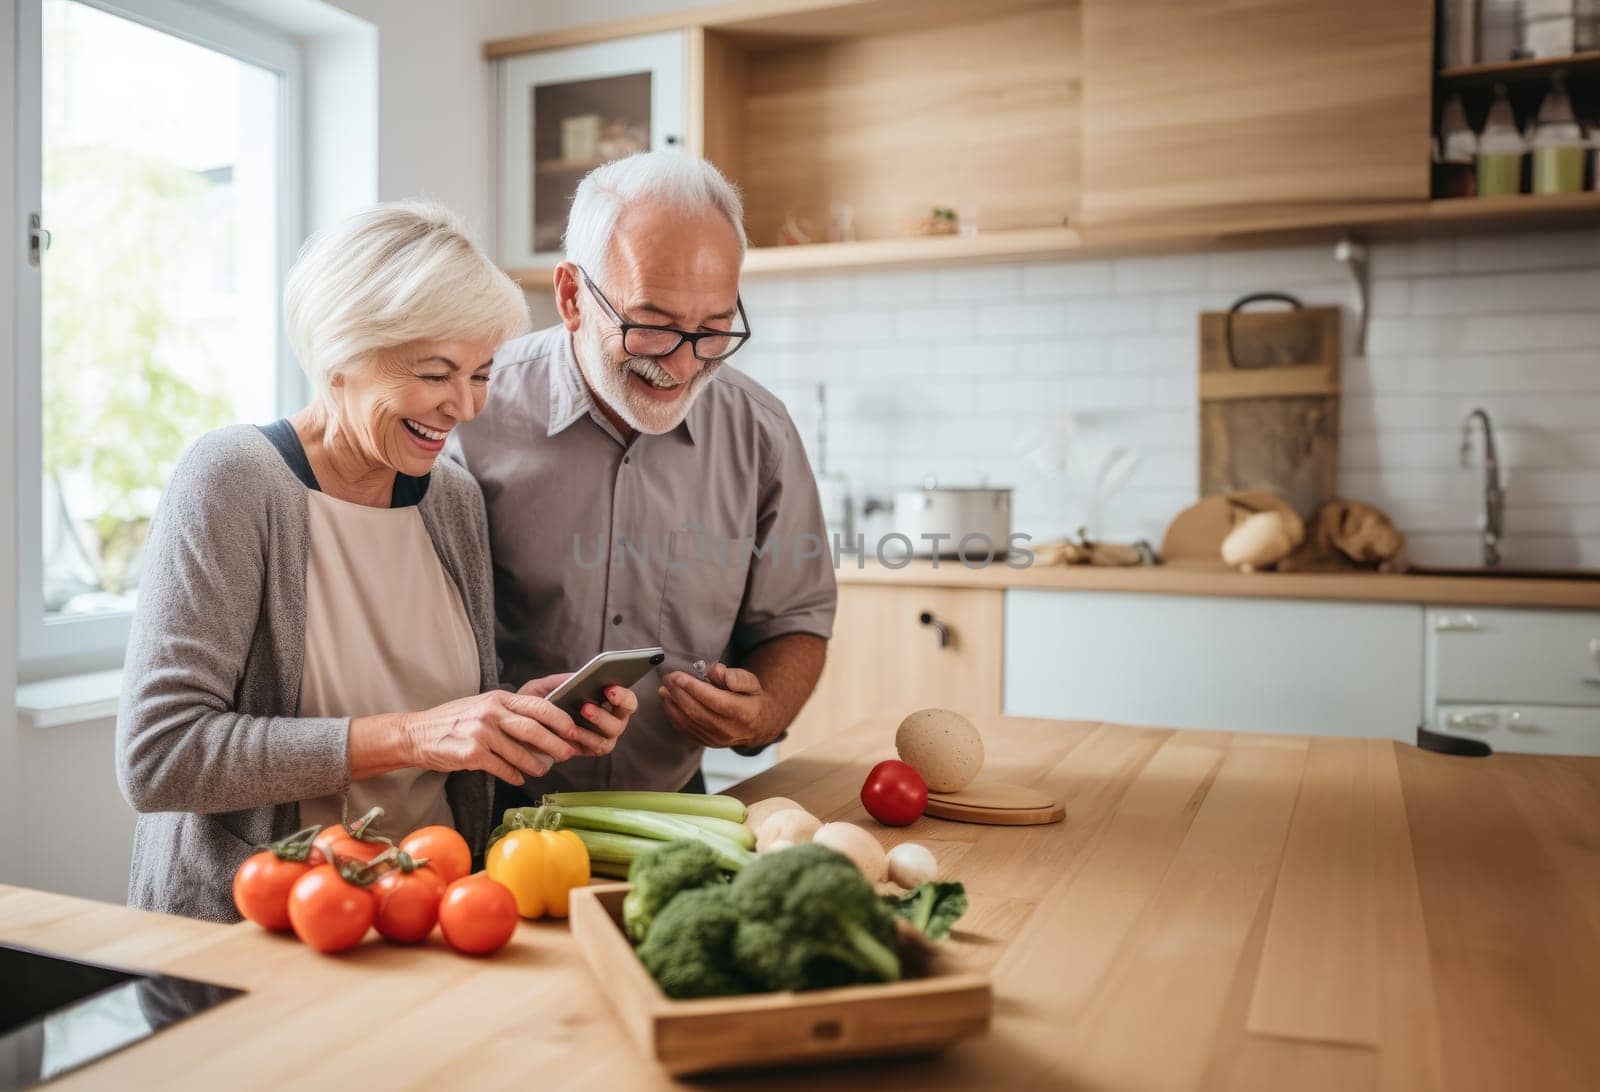 Heartwarming moment of shared happiness, an elderly married couple delights in cooking together, showcasing the enduring joy of companionship and culinary collaboration